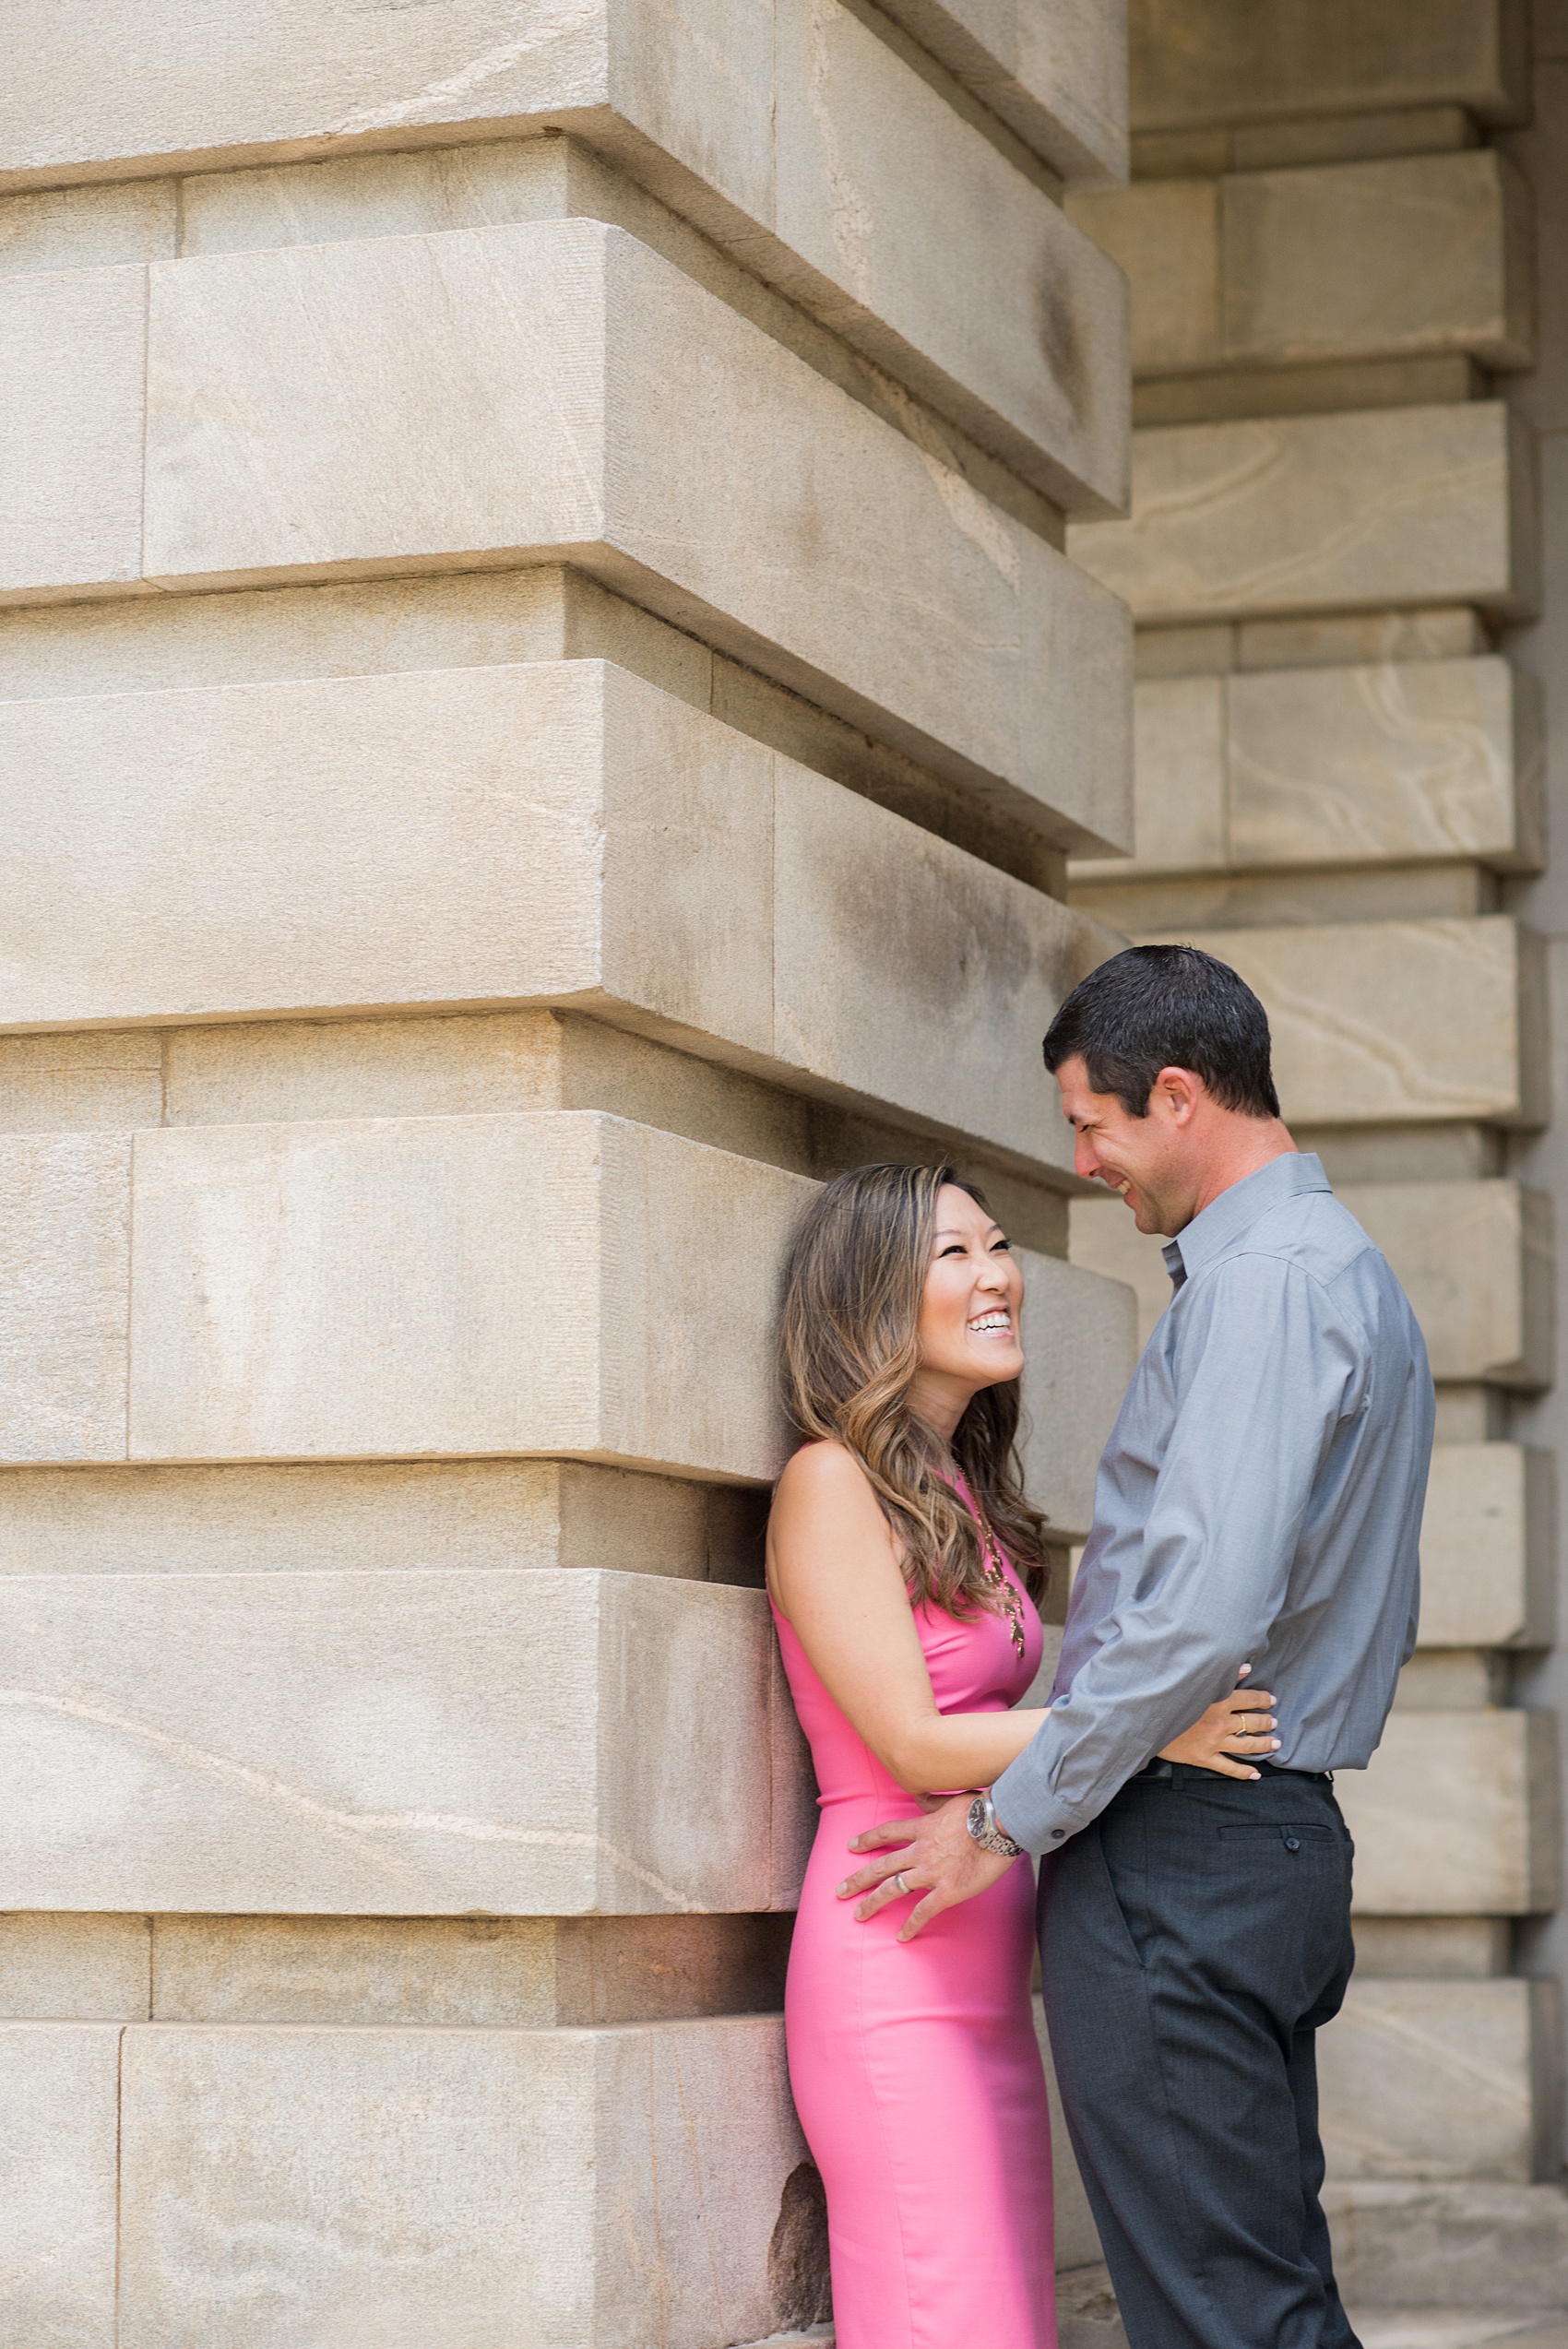 Colorful photos during a fall, autumn season engagement session. Iconic architecture captured at the state capitol. Taken by Mikkel Paige Photography in an urban city setting. Click through to see more from this vibrant, unique photography session.